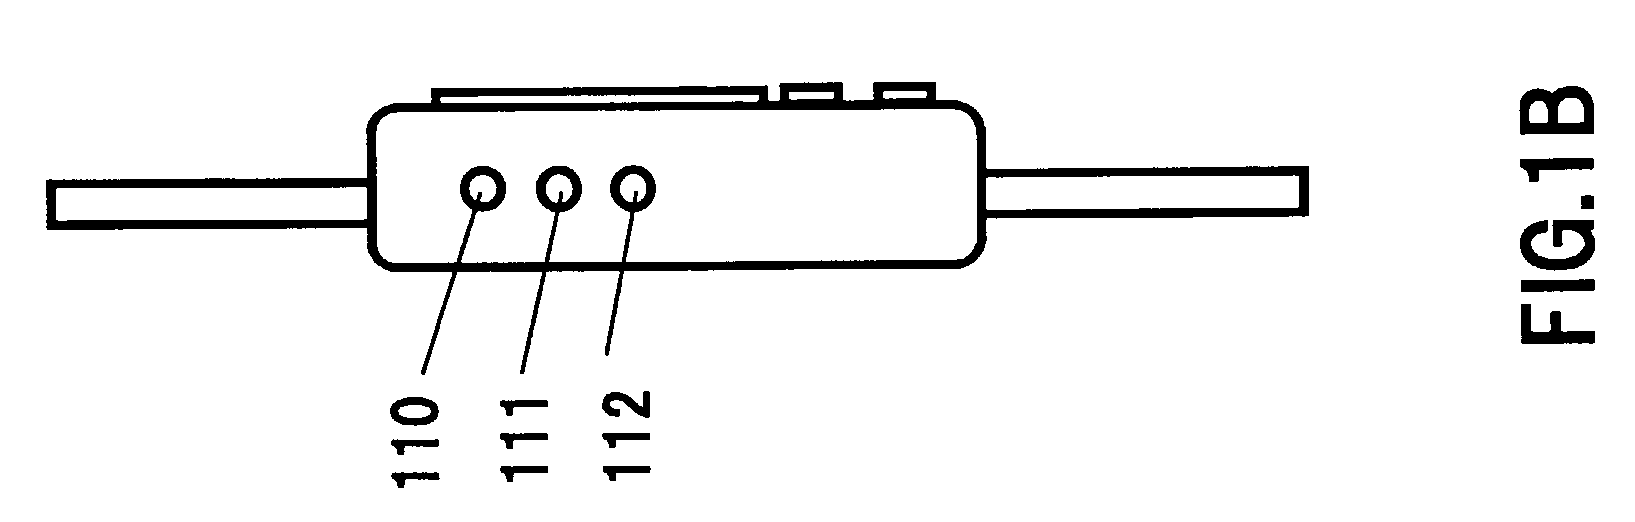 Portable device for collecting information about living body